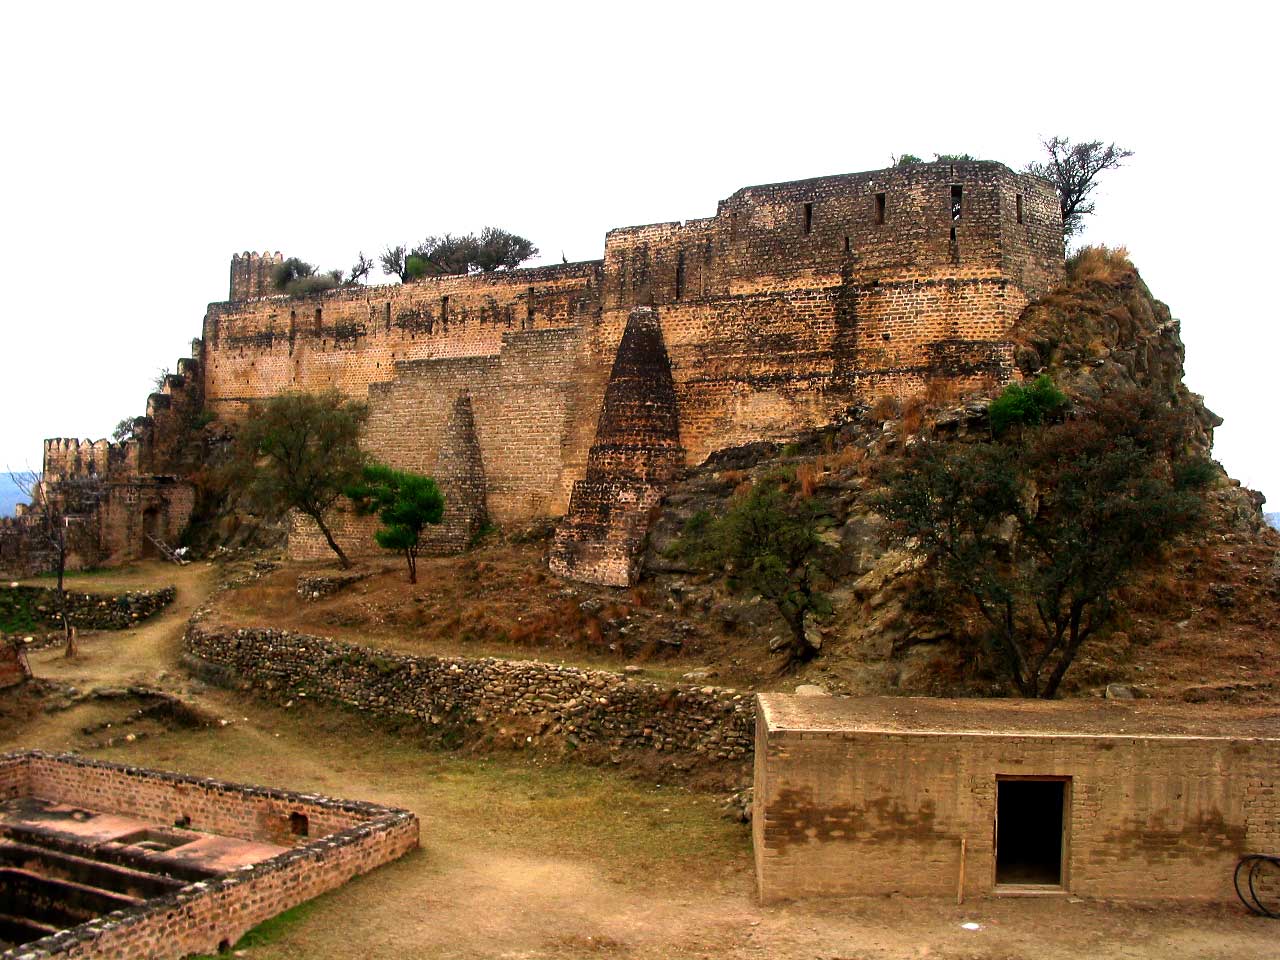 Courtyard of Ramkot Fort